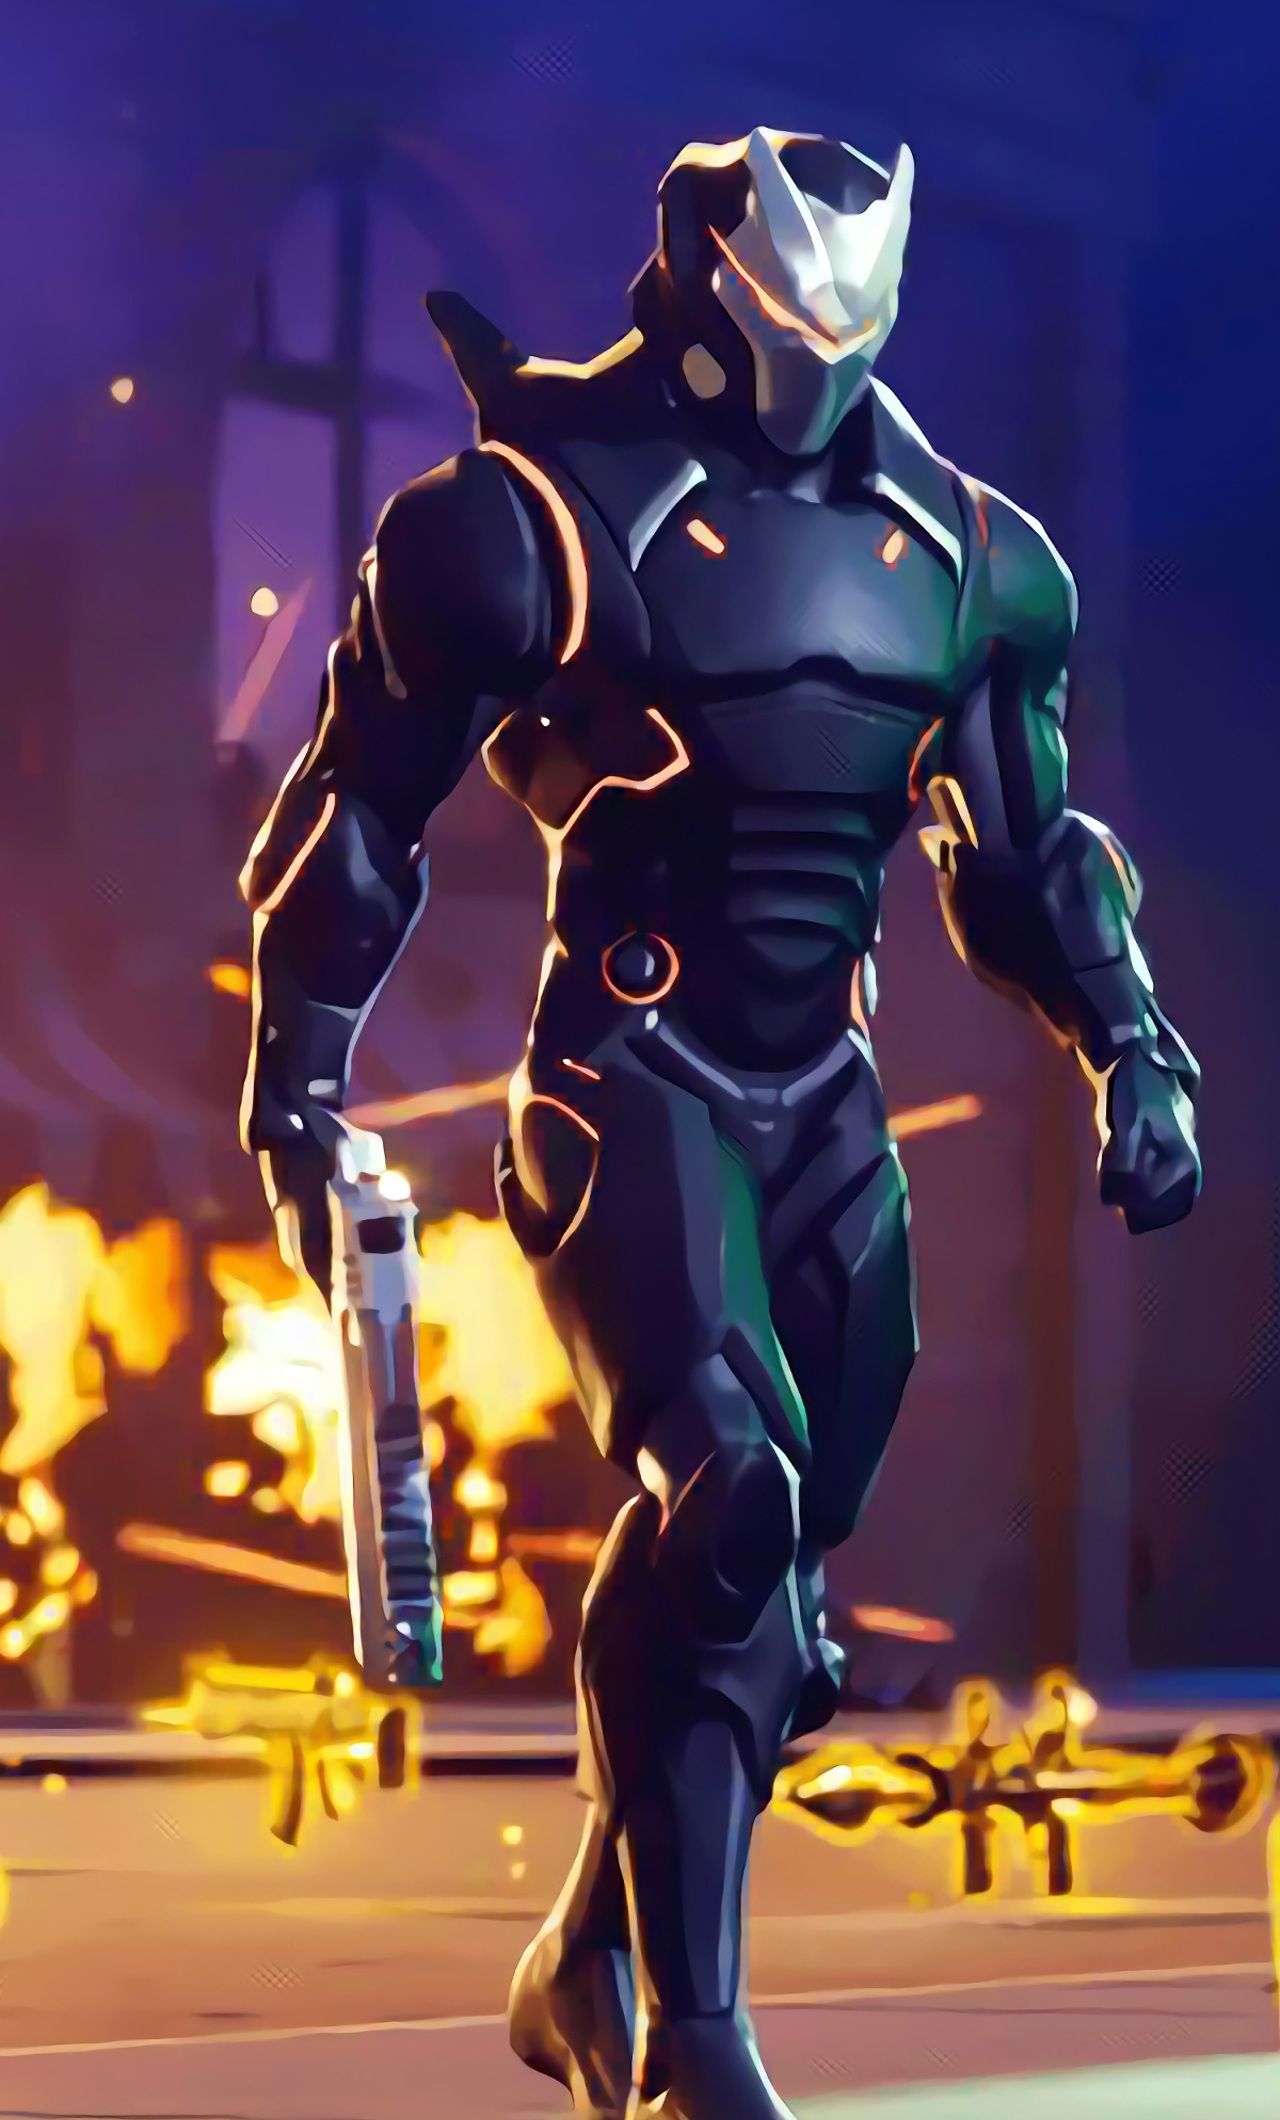 Fortnite Amazon Fire Tablet Wallpapers On Wallpaperdog